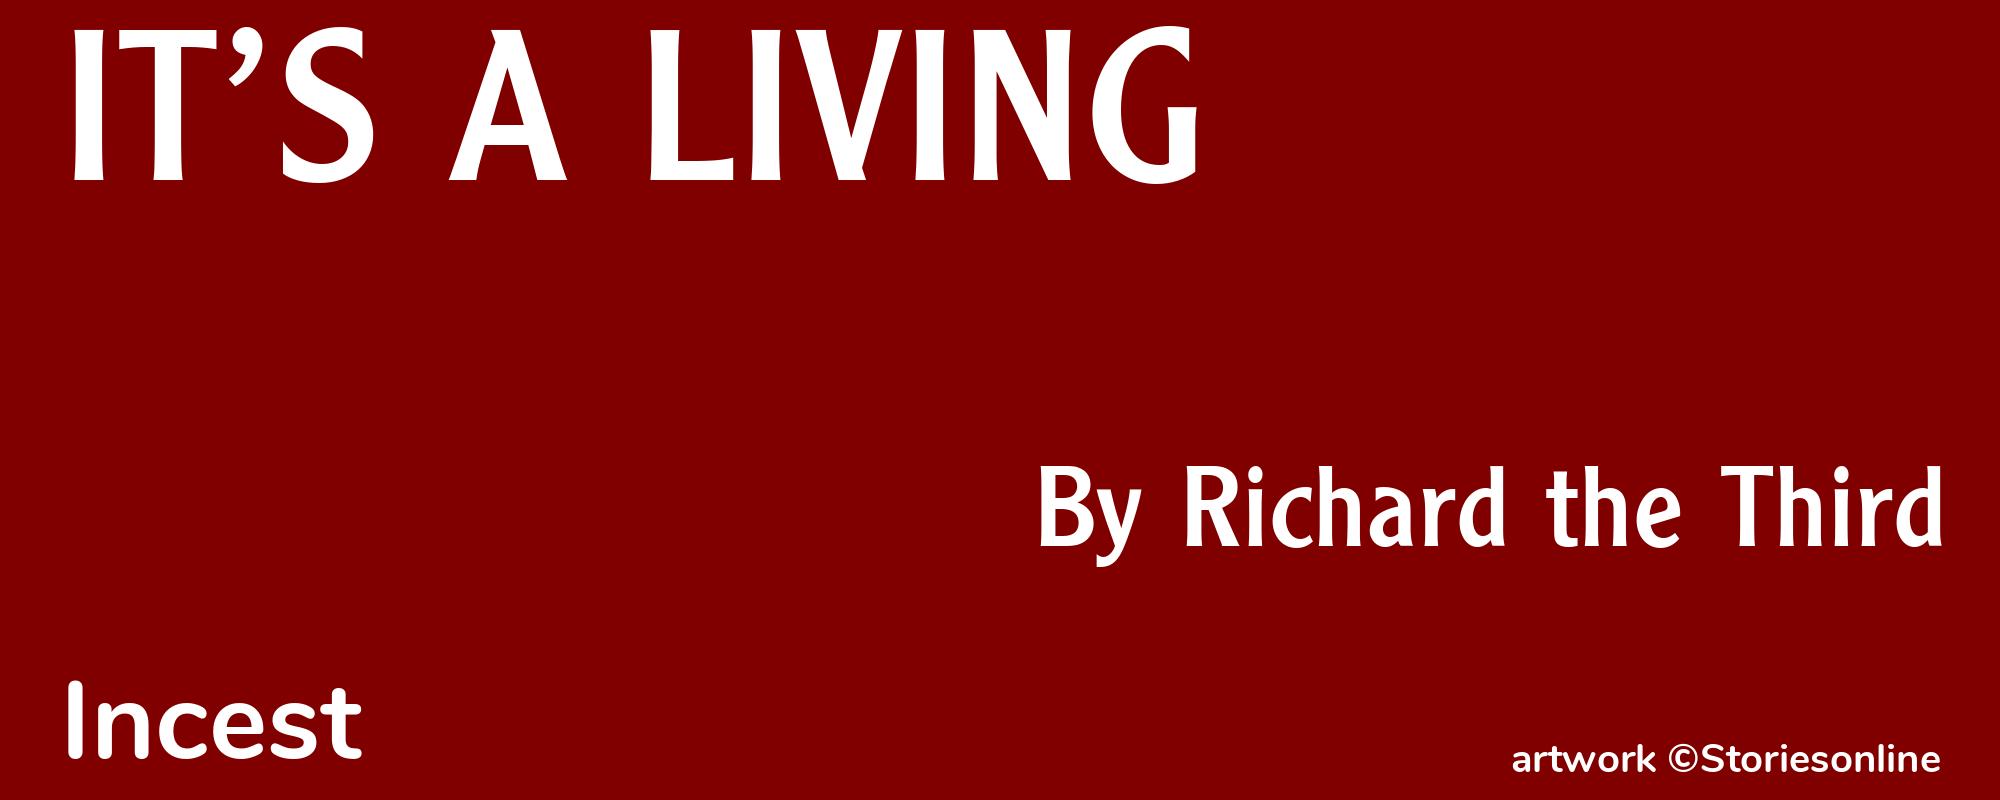 IT’S A LIVING - Cover